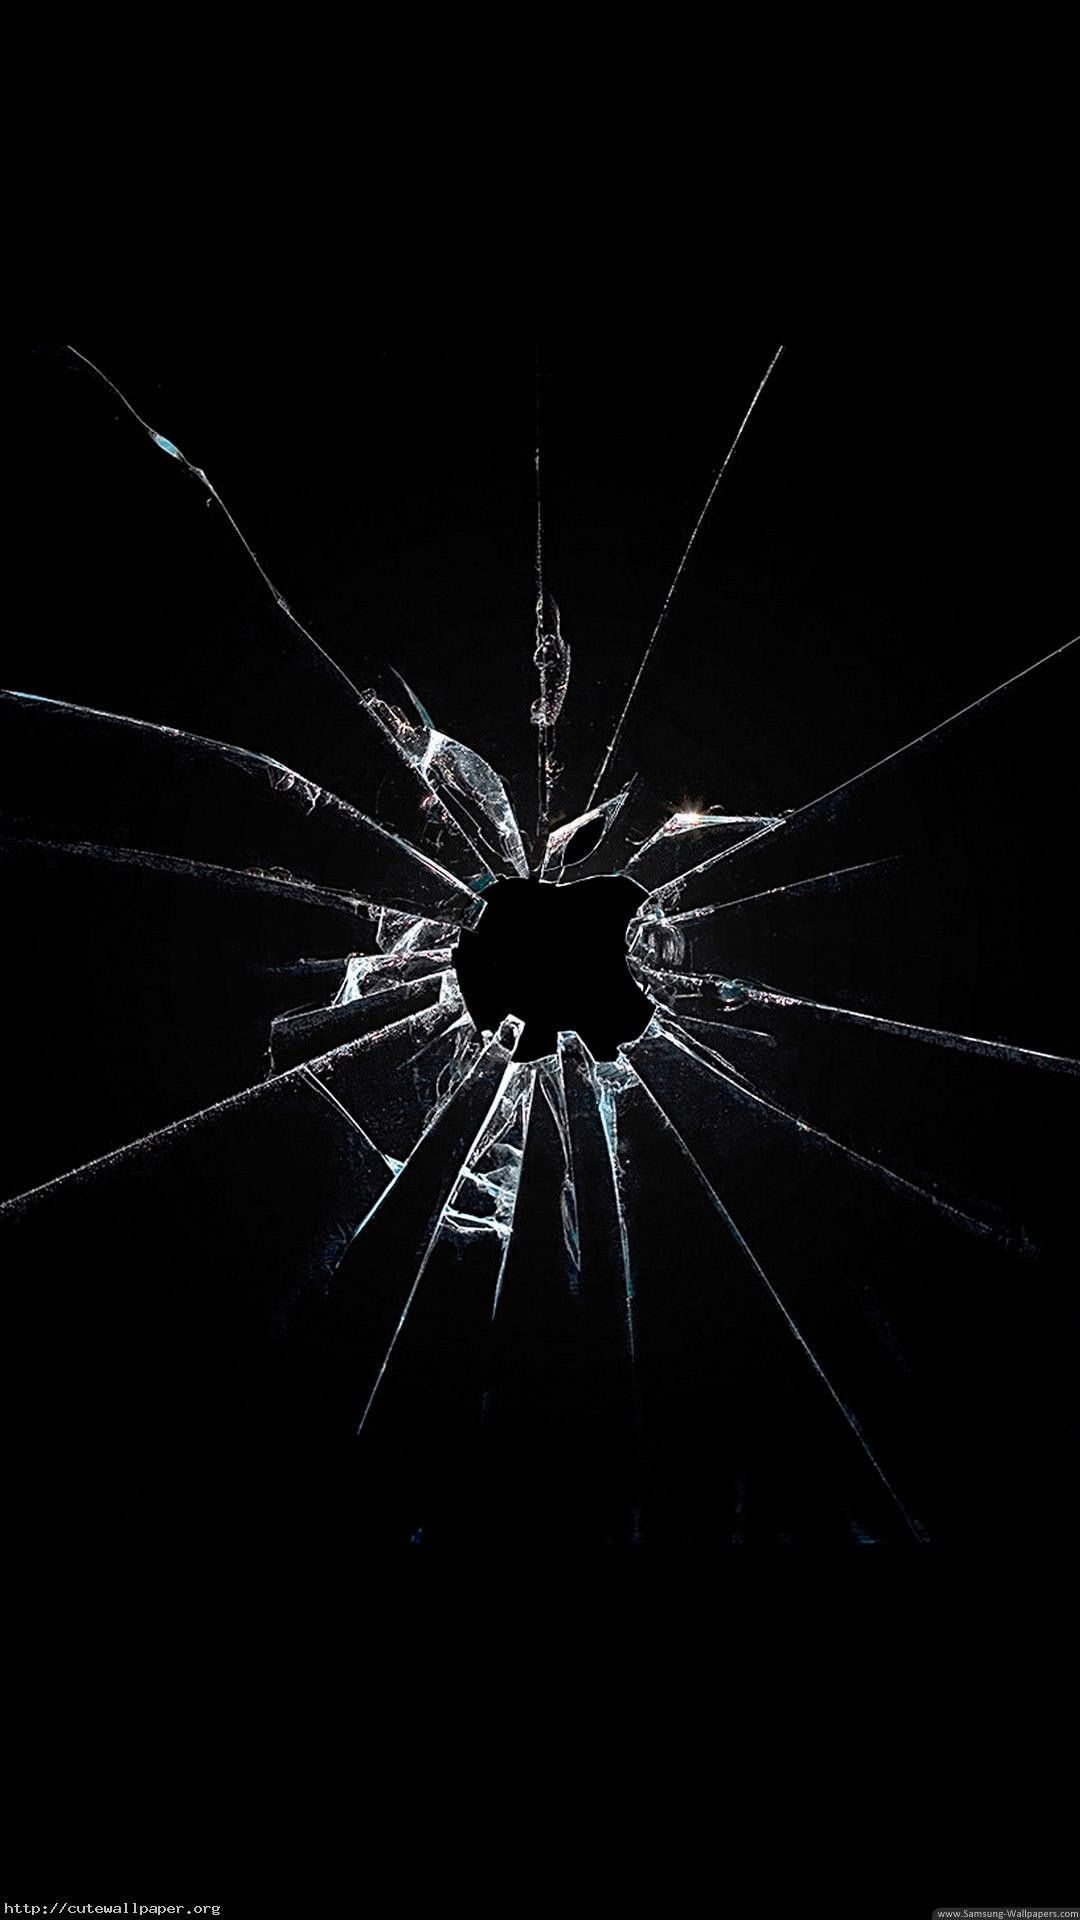 1080x1920 1920x1080 Cracked Screen Wallpaper Broken Make It Look Like You Is Android  ...">